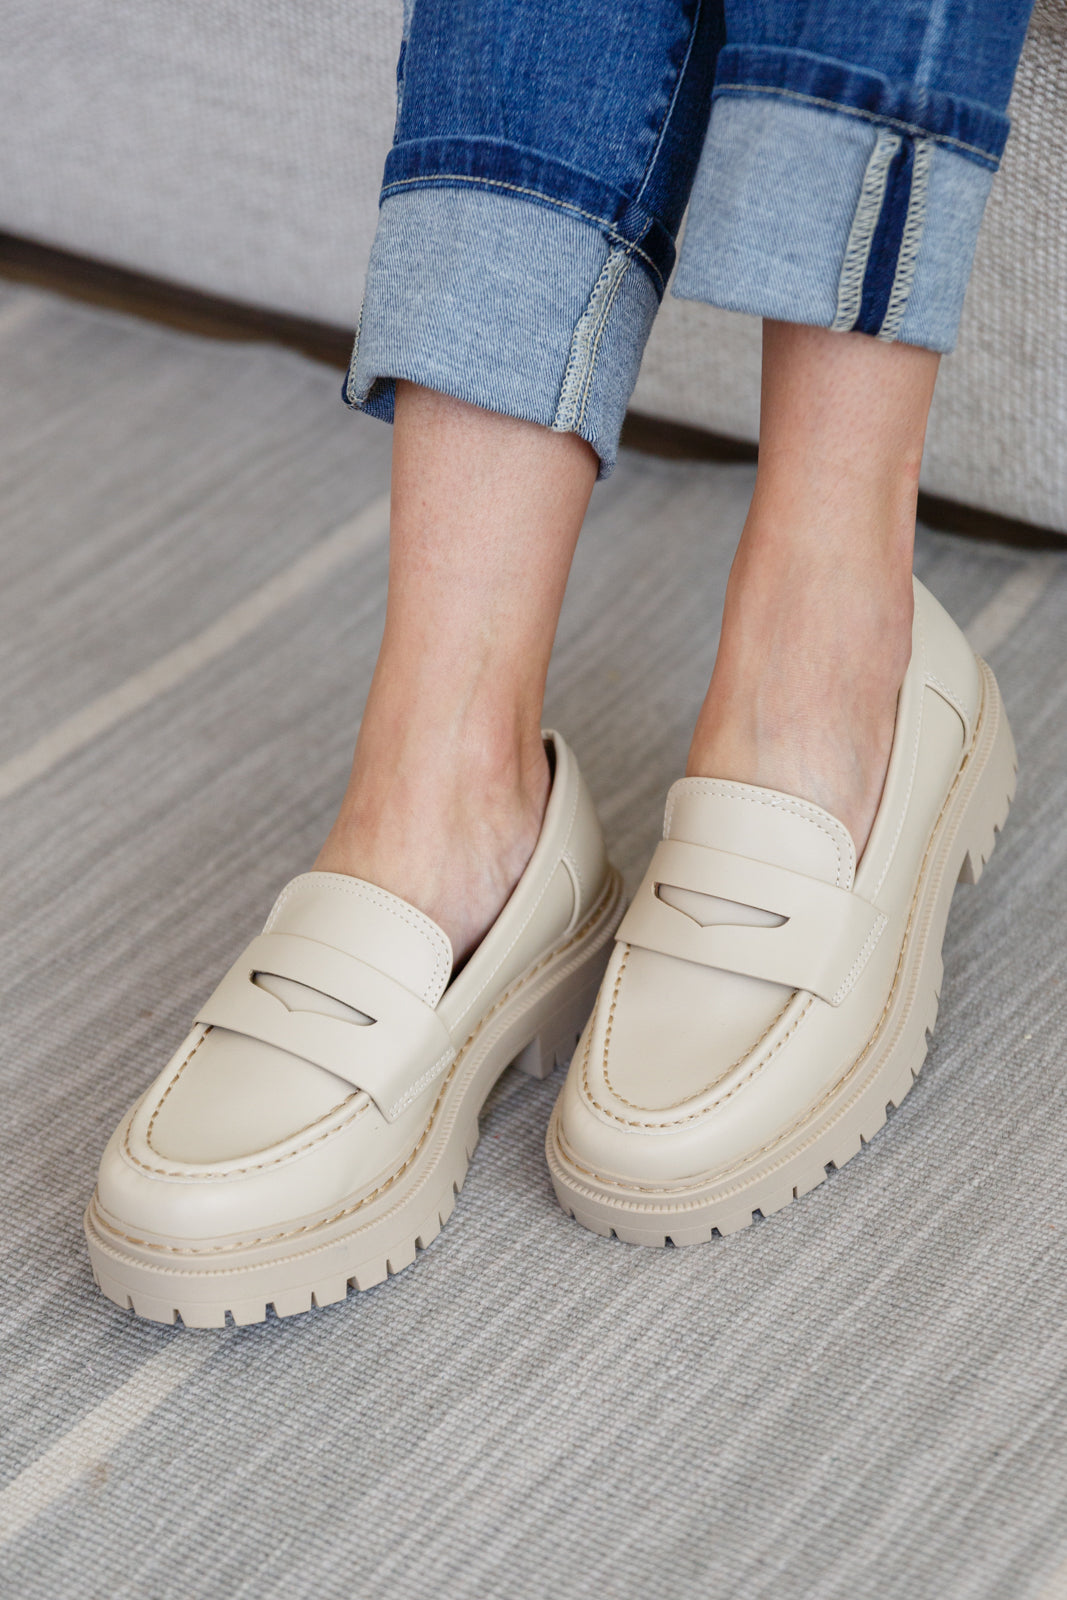 Penny For Your Thoughts Loafers in Bone - Three Bears Boutique